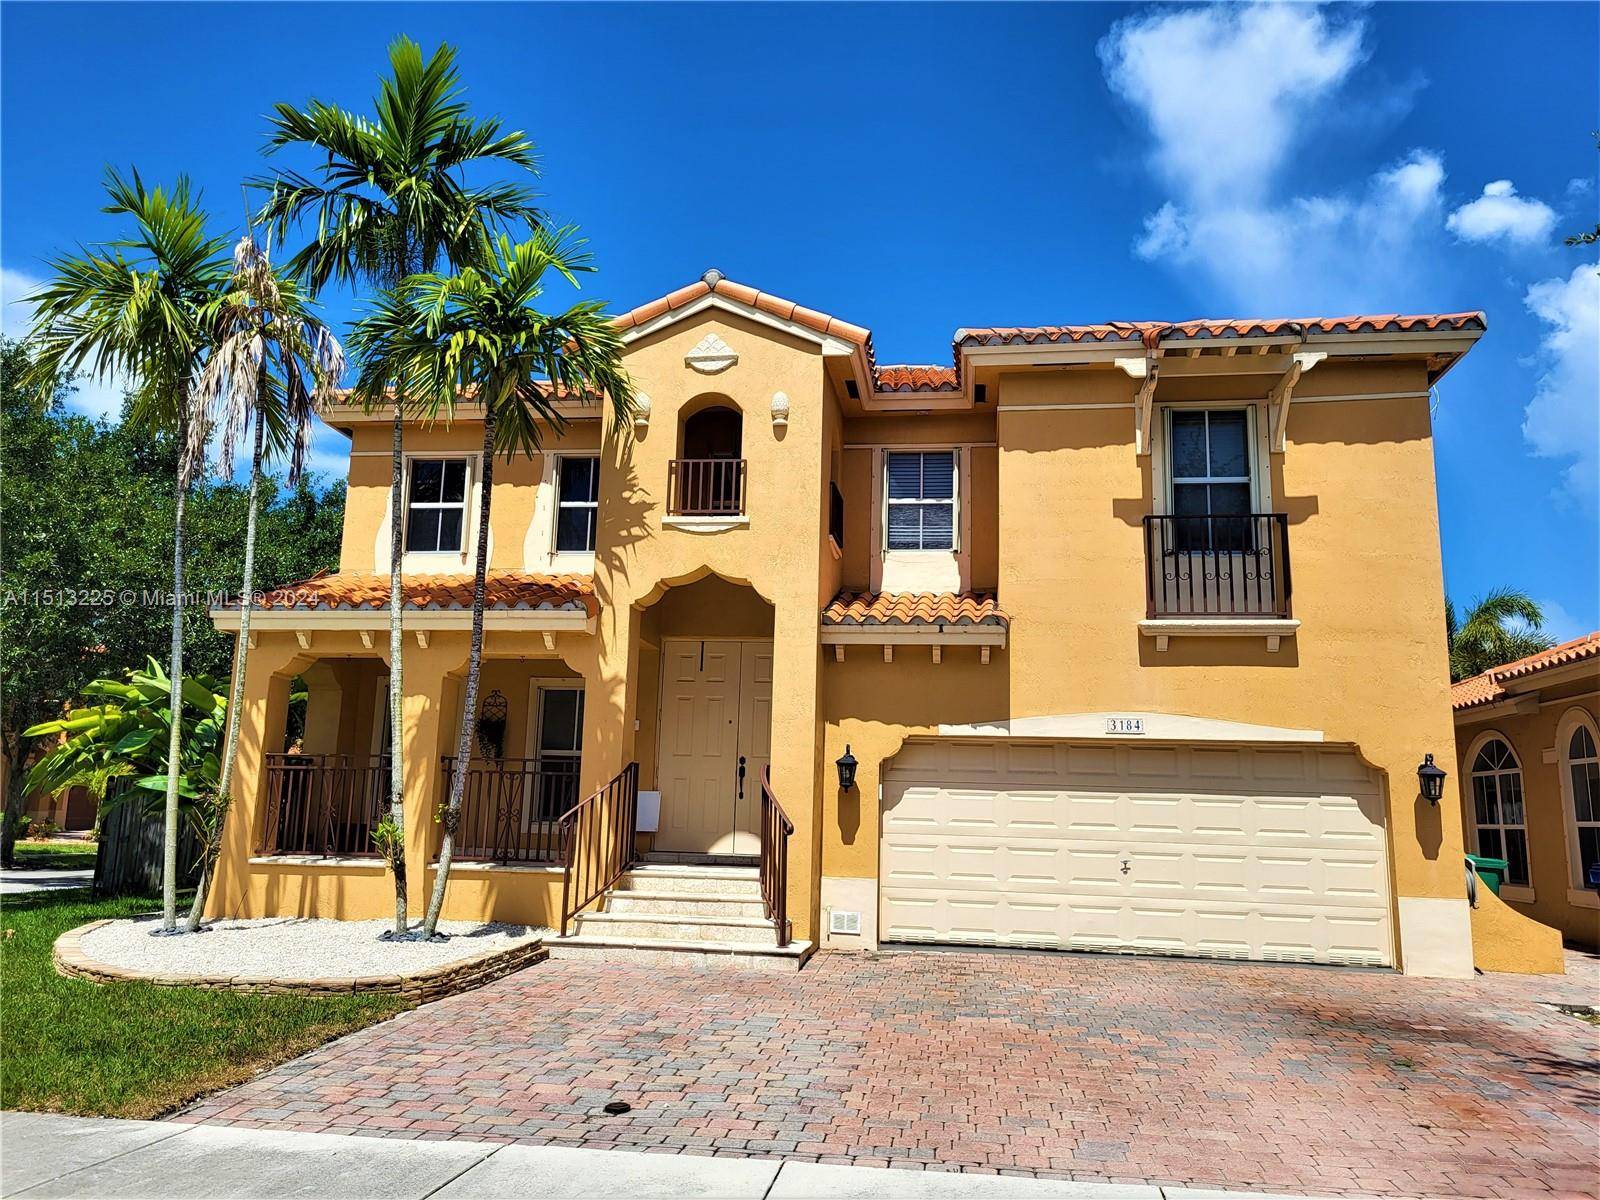 CORNER HOME BELLAGIO VENETIAN ISLES GATED COMMUNITY,,, PROPERTY WITH APROX.